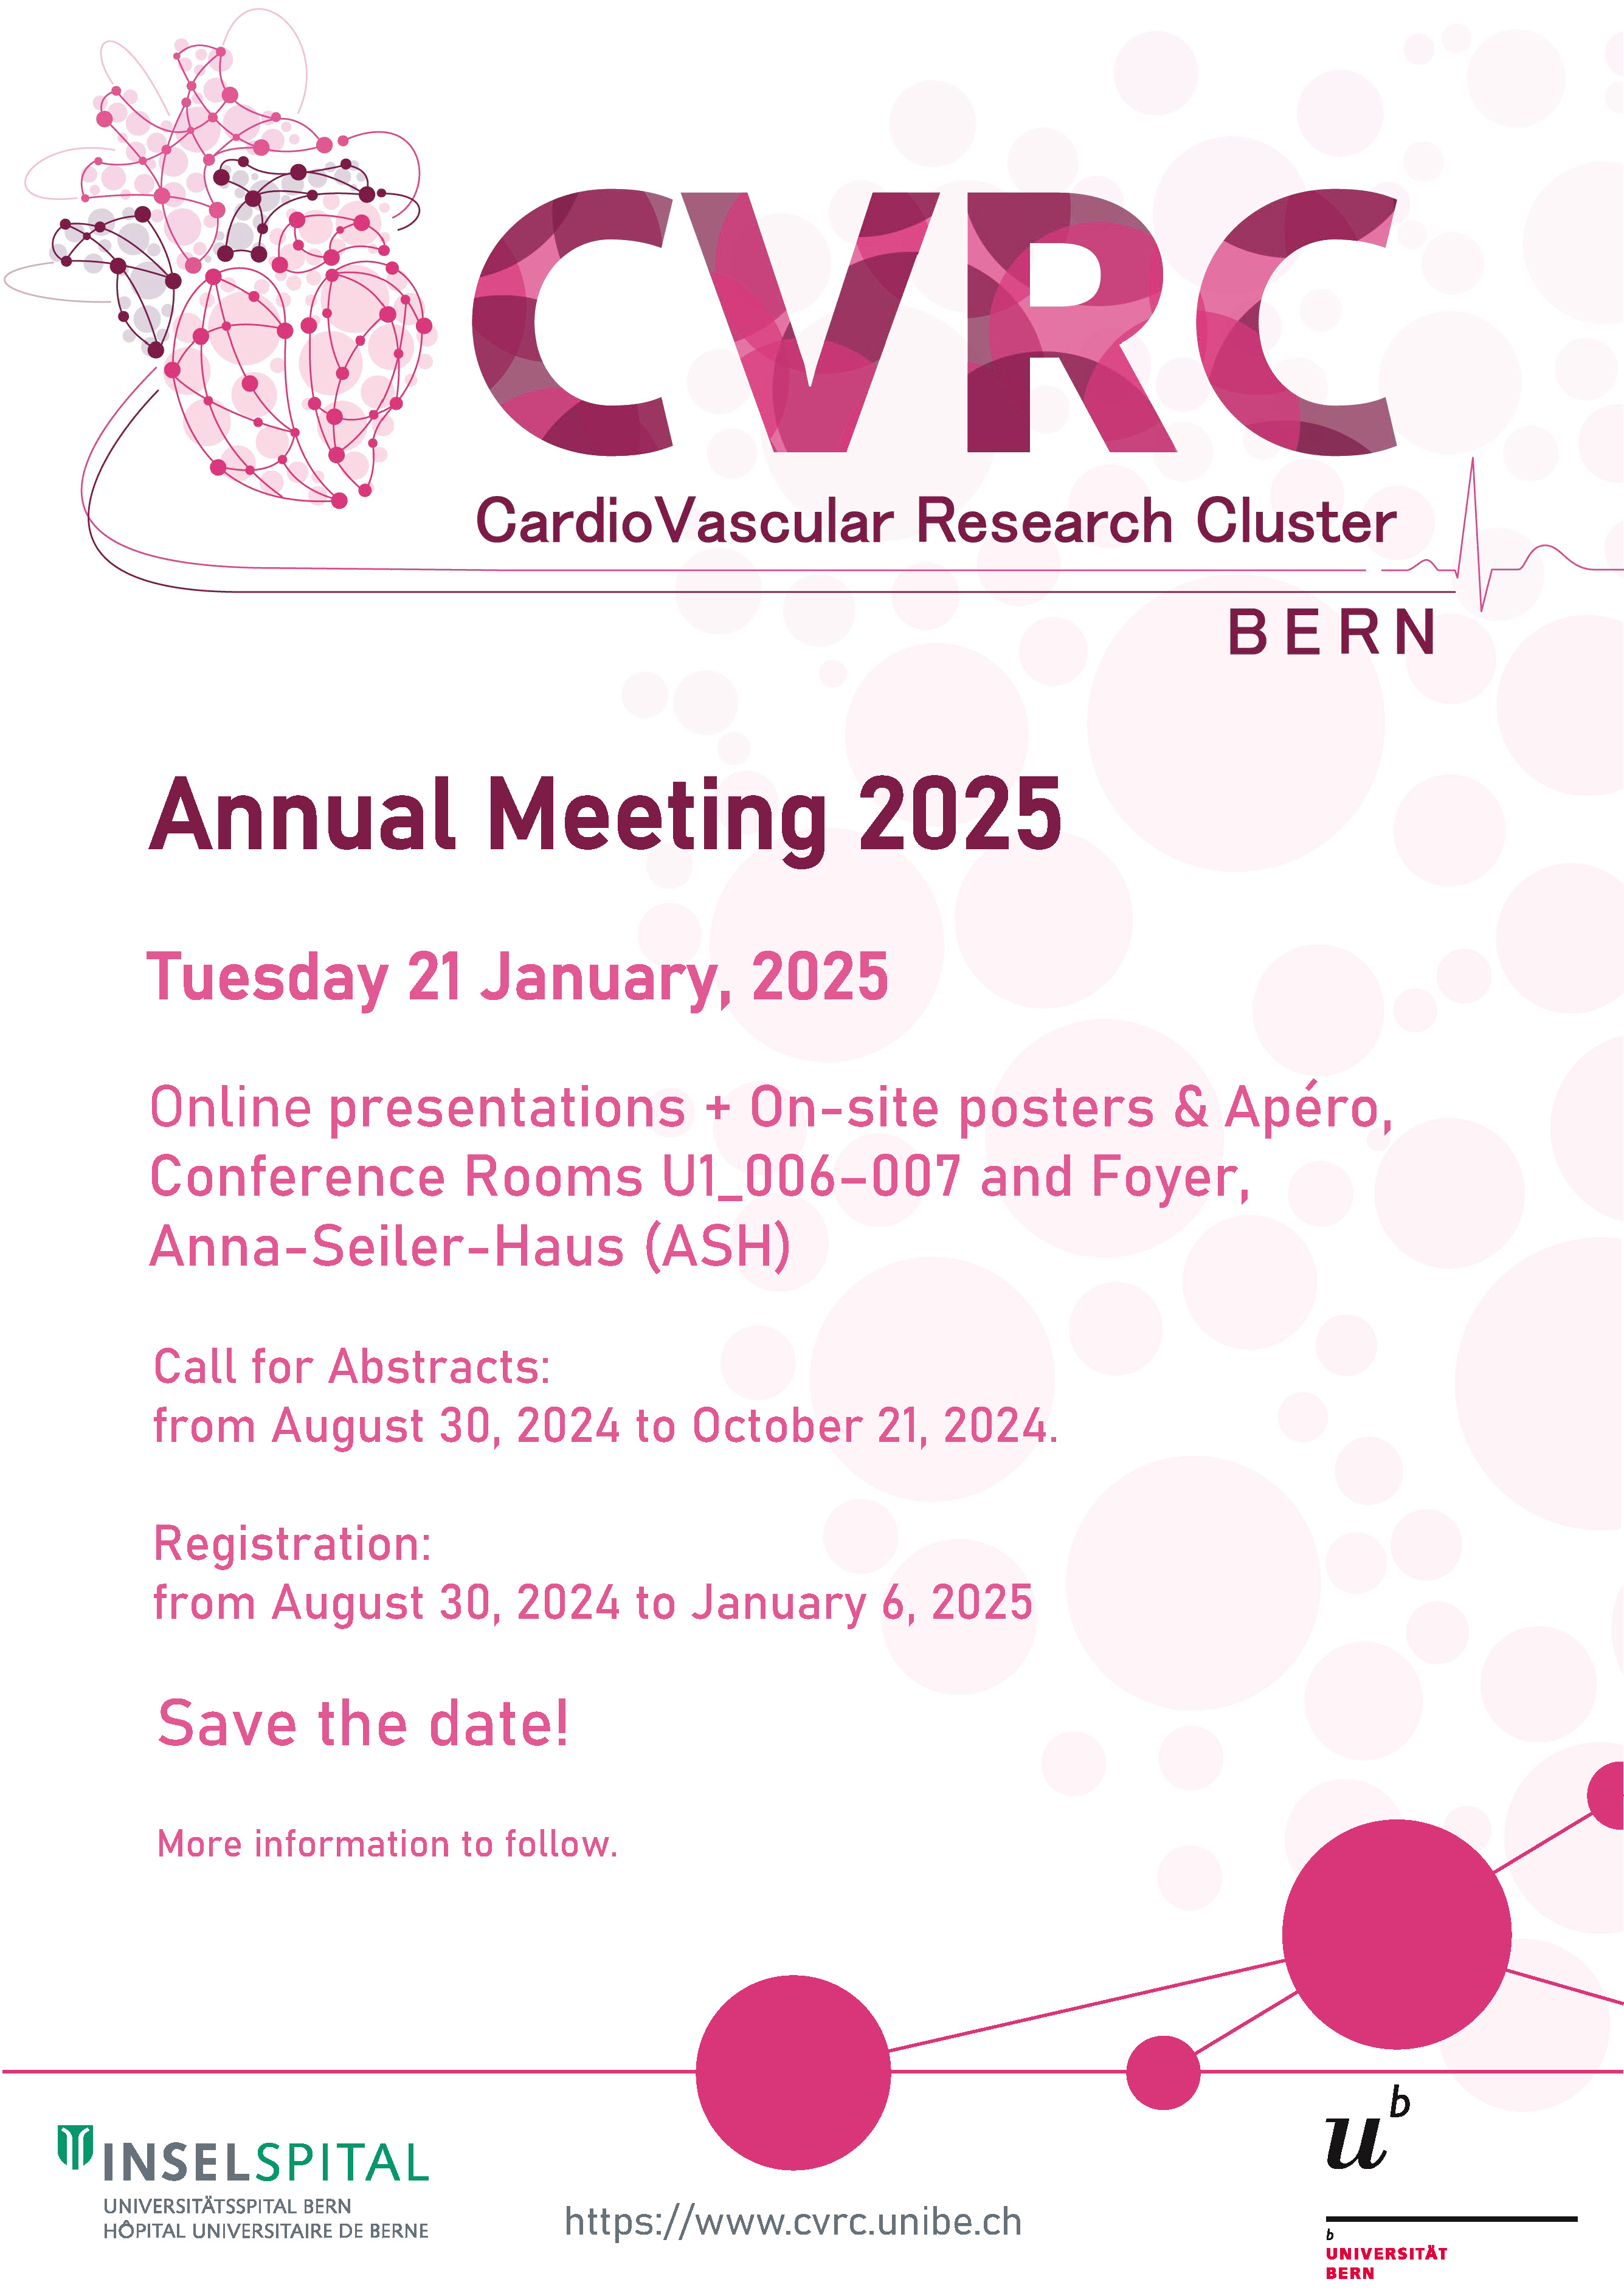 Save the date flyer CVRC Annual Meeting 2025